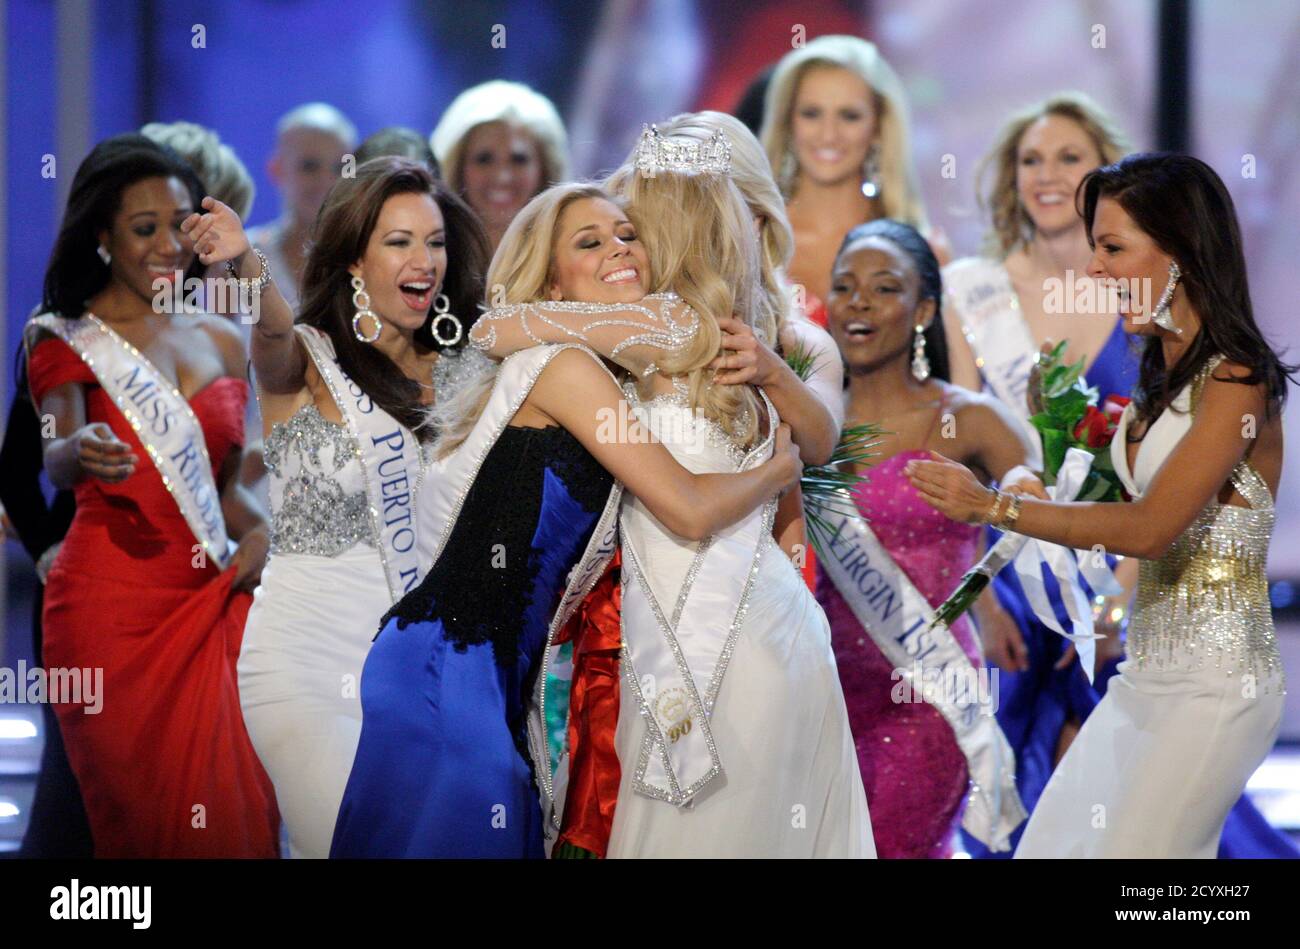 Miss Nebraska Teresa Scanlan (C), 17, is mobbed by other contestants after being crowned Miss America 2011 during the Miss America Pageant at the Theatre for the Performing Arts at the Planet Hollywood Resort & Casino in Las Vegas, Nevada, January 15, 2011. Scanlan was named Miss America on Saturday becoming the youngest winner ever in the pageant's history after a night of being judged for poise, talent, fitness and knowledge.    REUTERS/Steve Marcus (UNITED STATES - Tags: ENTERTAINMENT) Stock Photo